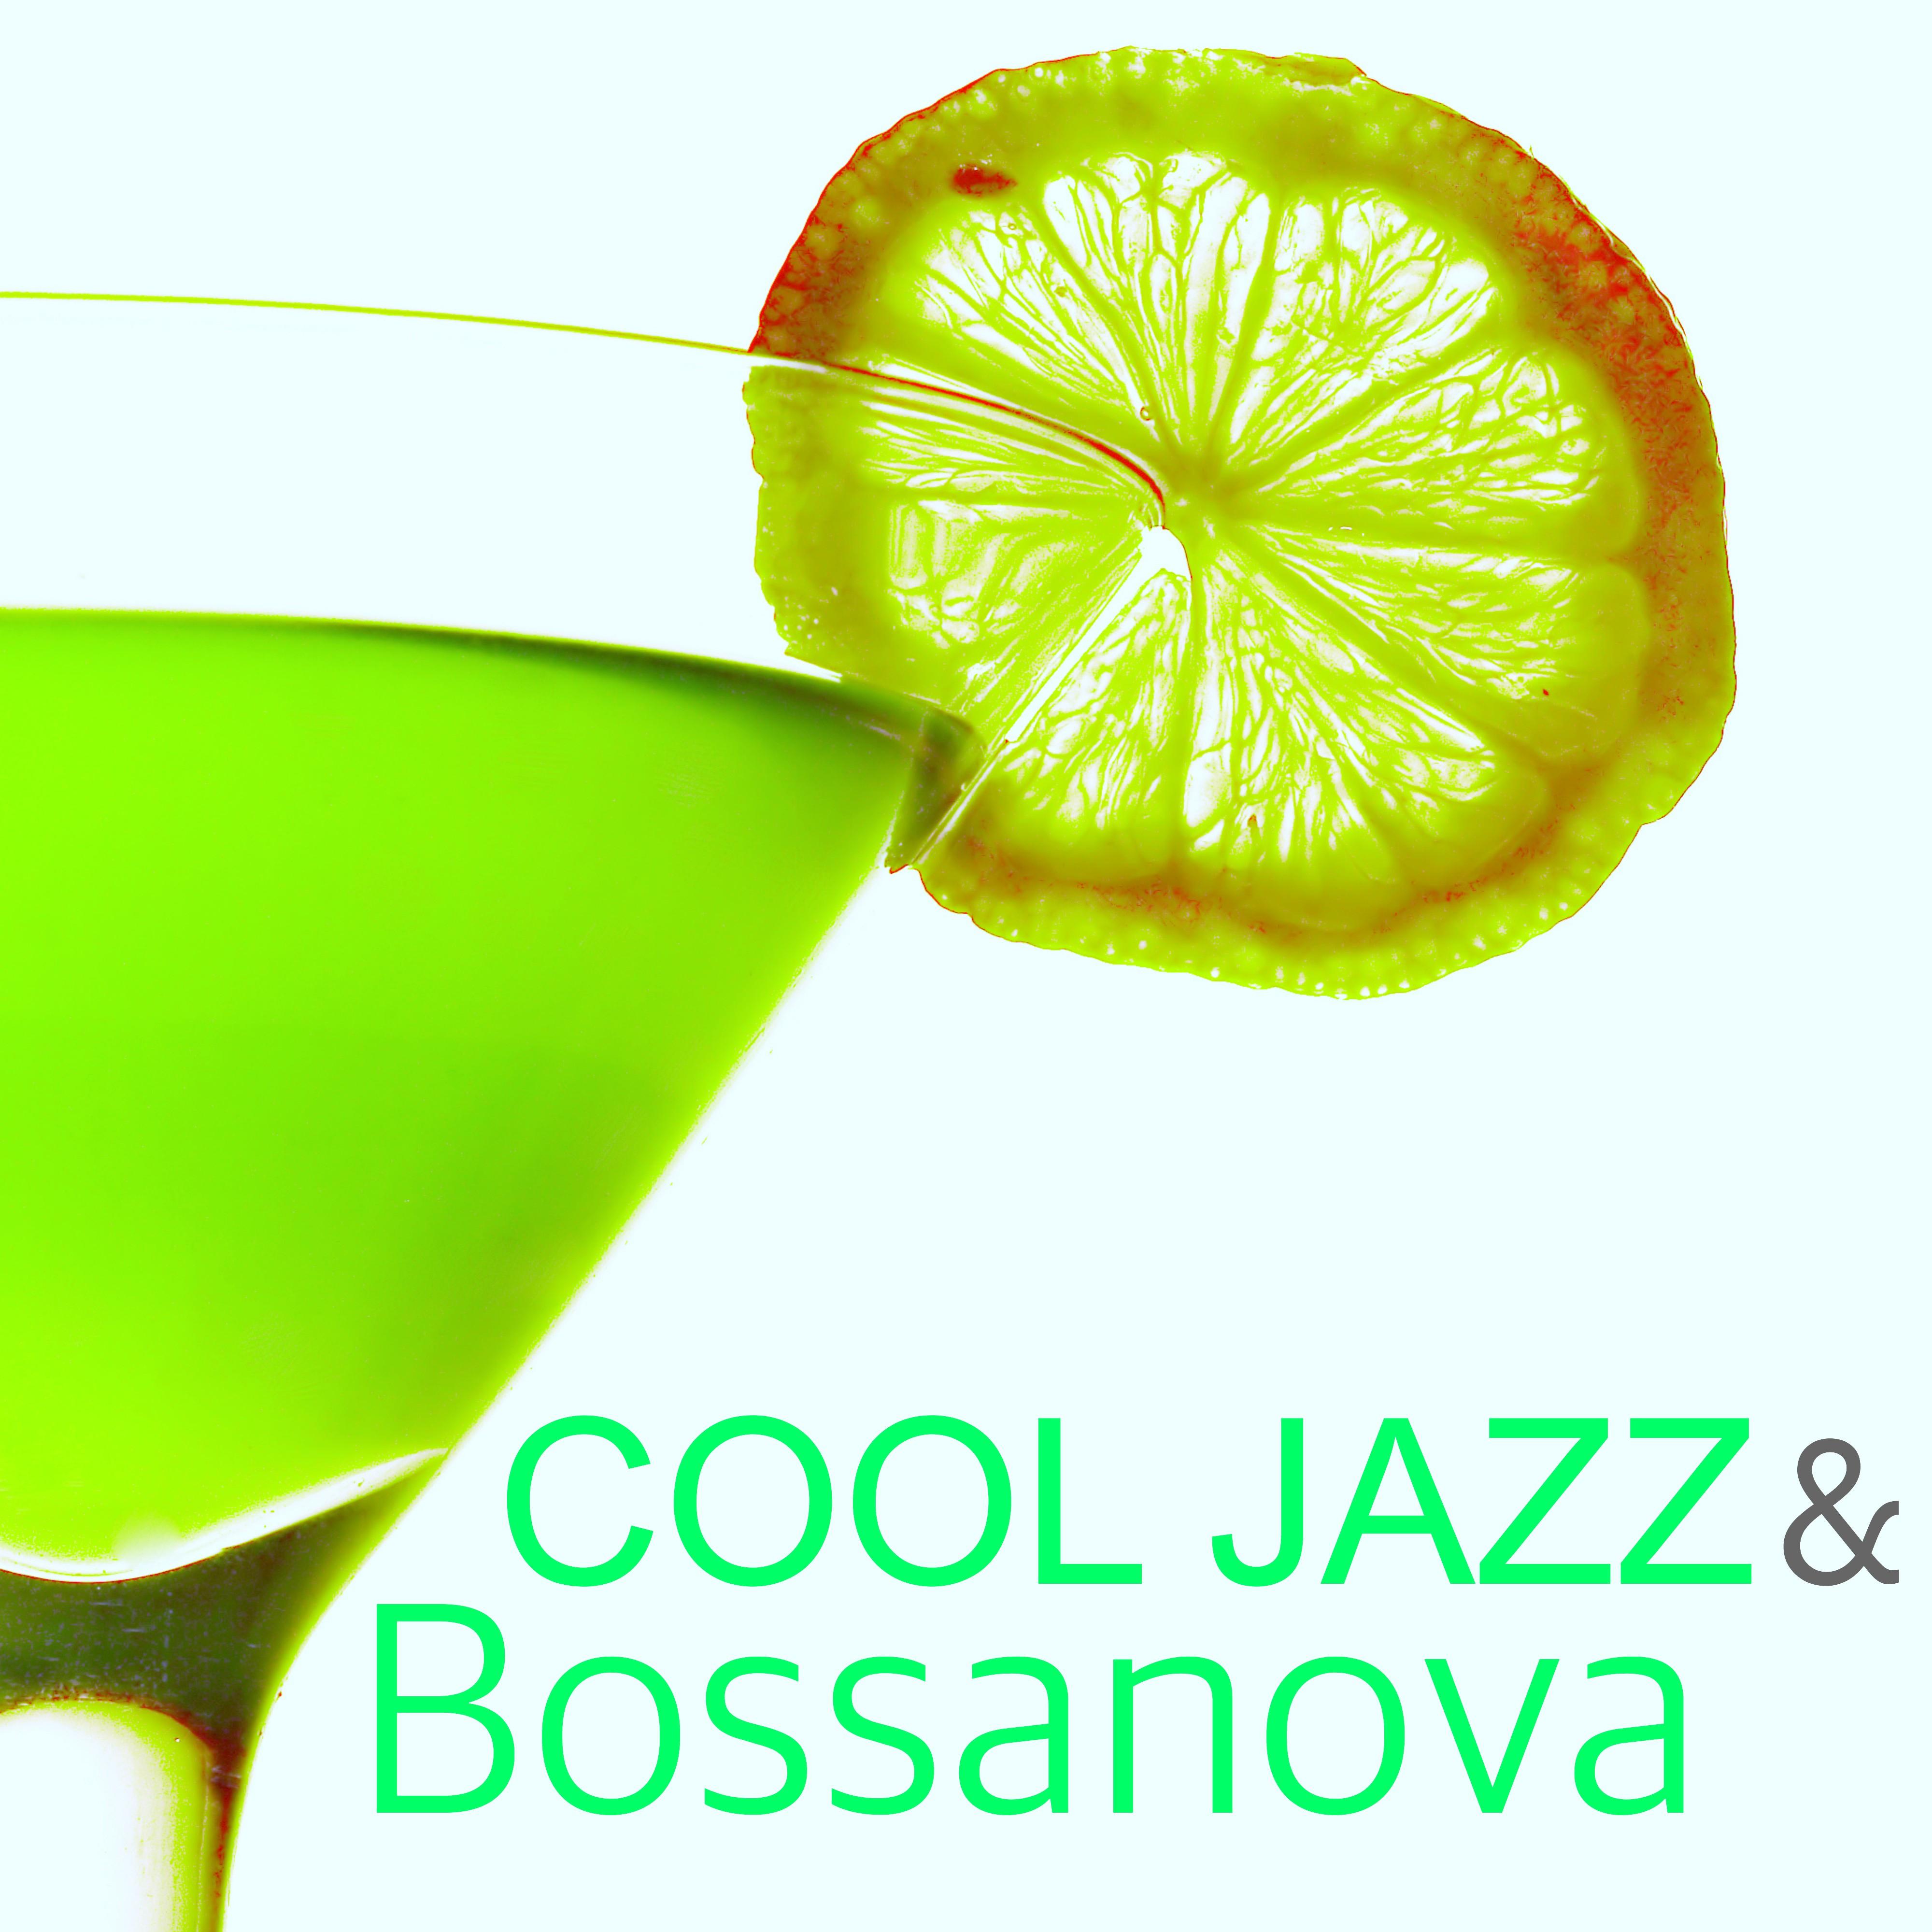 Cool Jazz & Bossanova - Easy Listening Music for Jazz Club & Cocktail Party